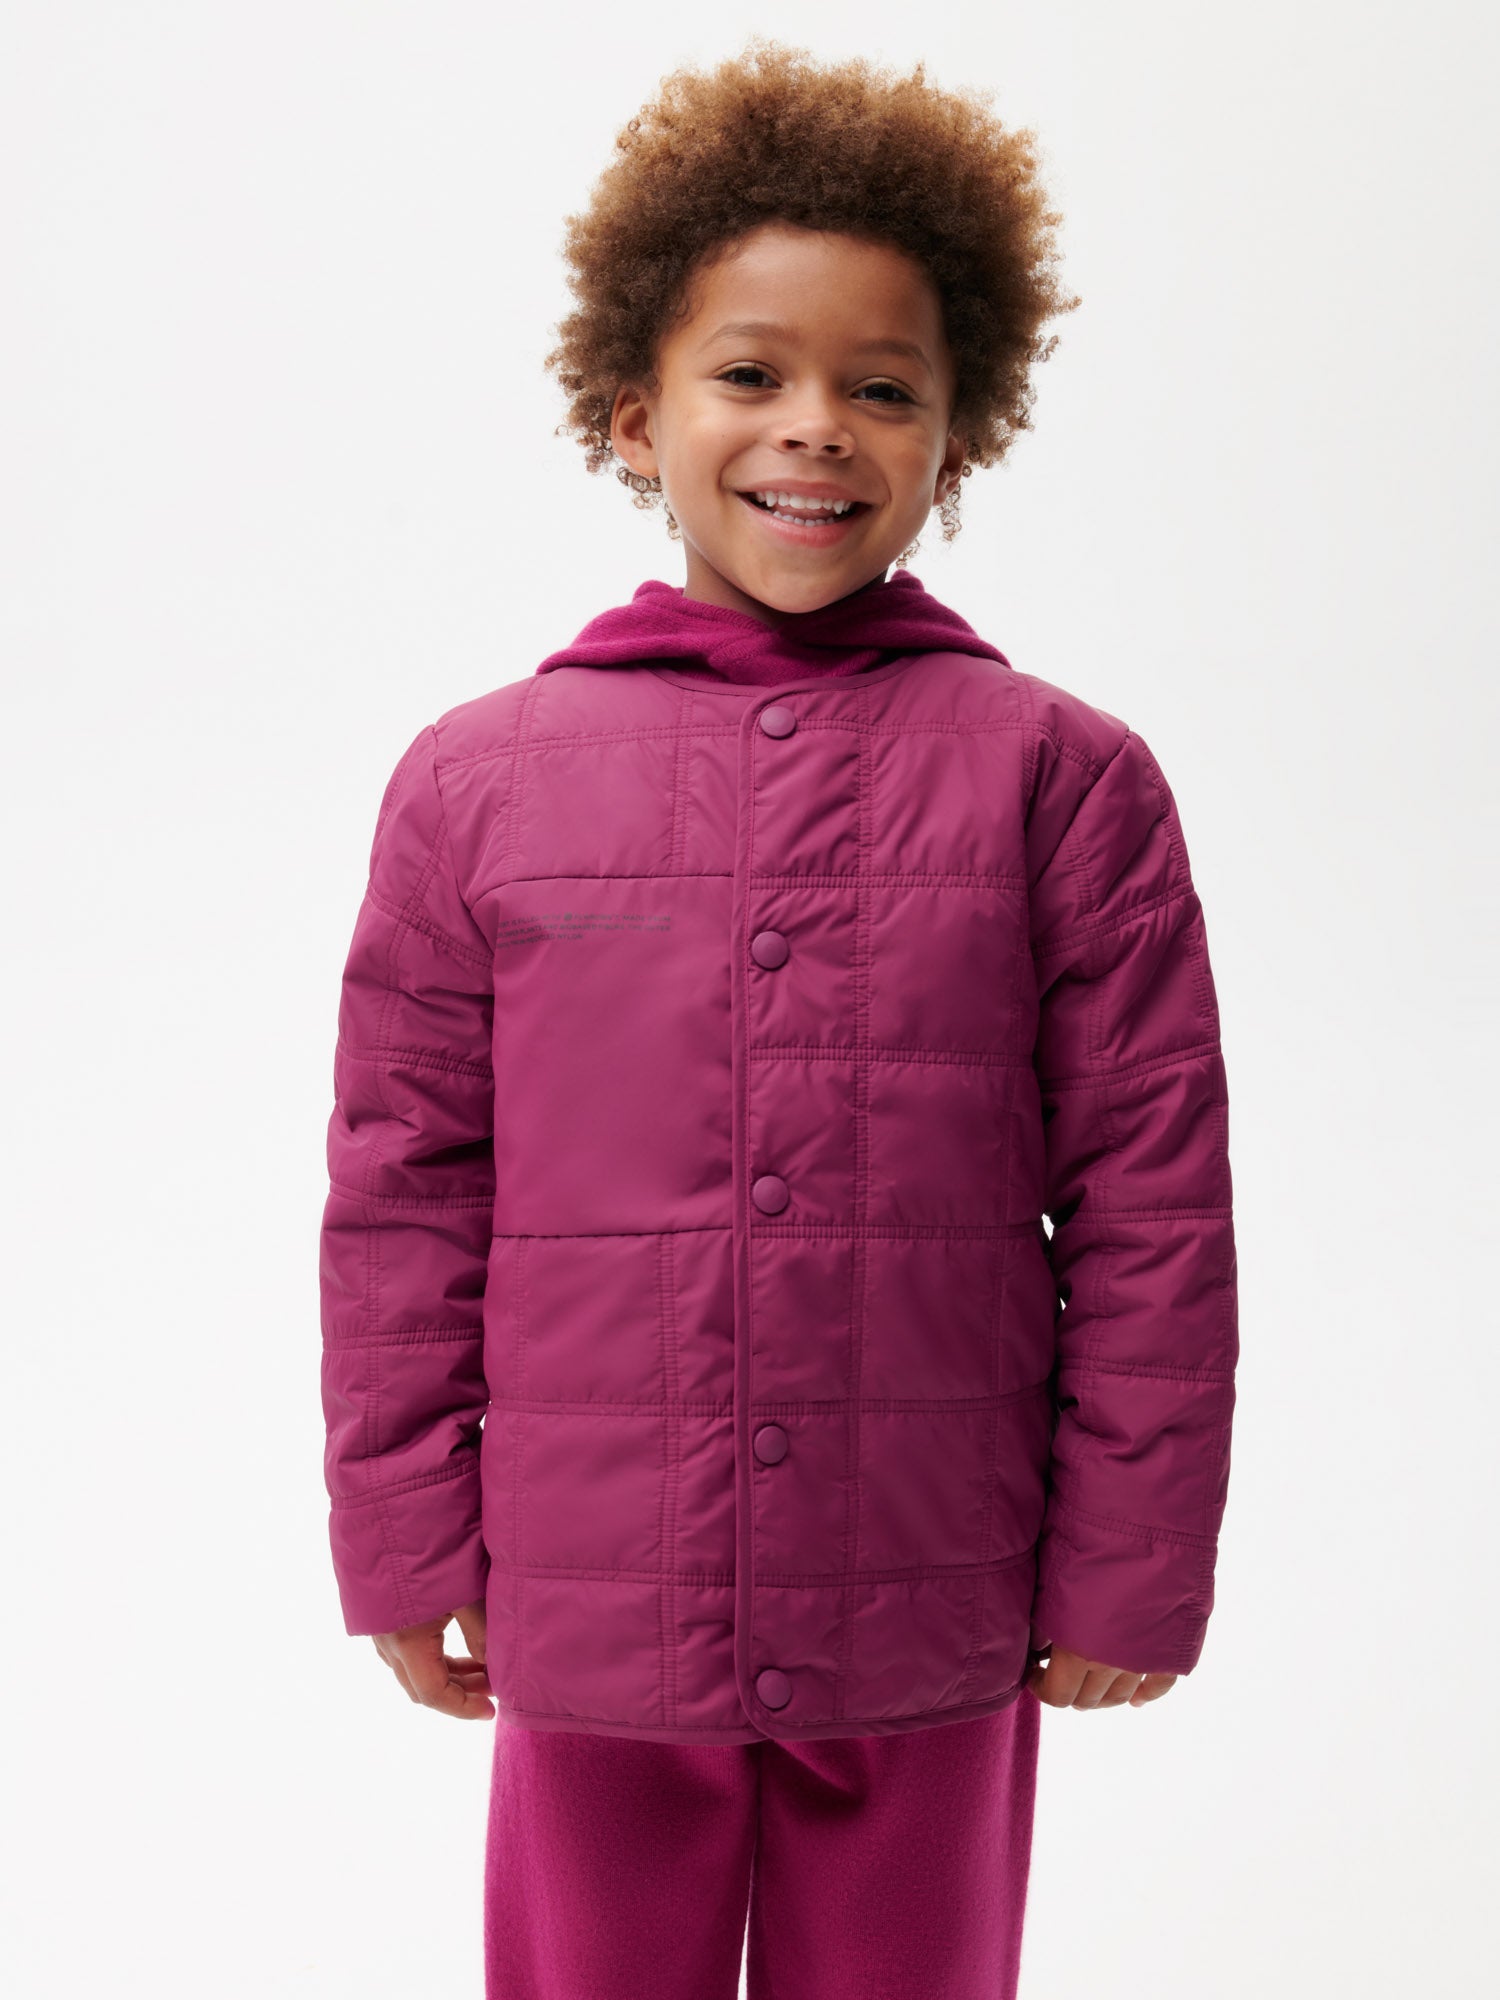 Kids-Recycled-Nylon-NW-FLWRDWN-Quilted-Collarless-Jacket-Plum-Purple-4